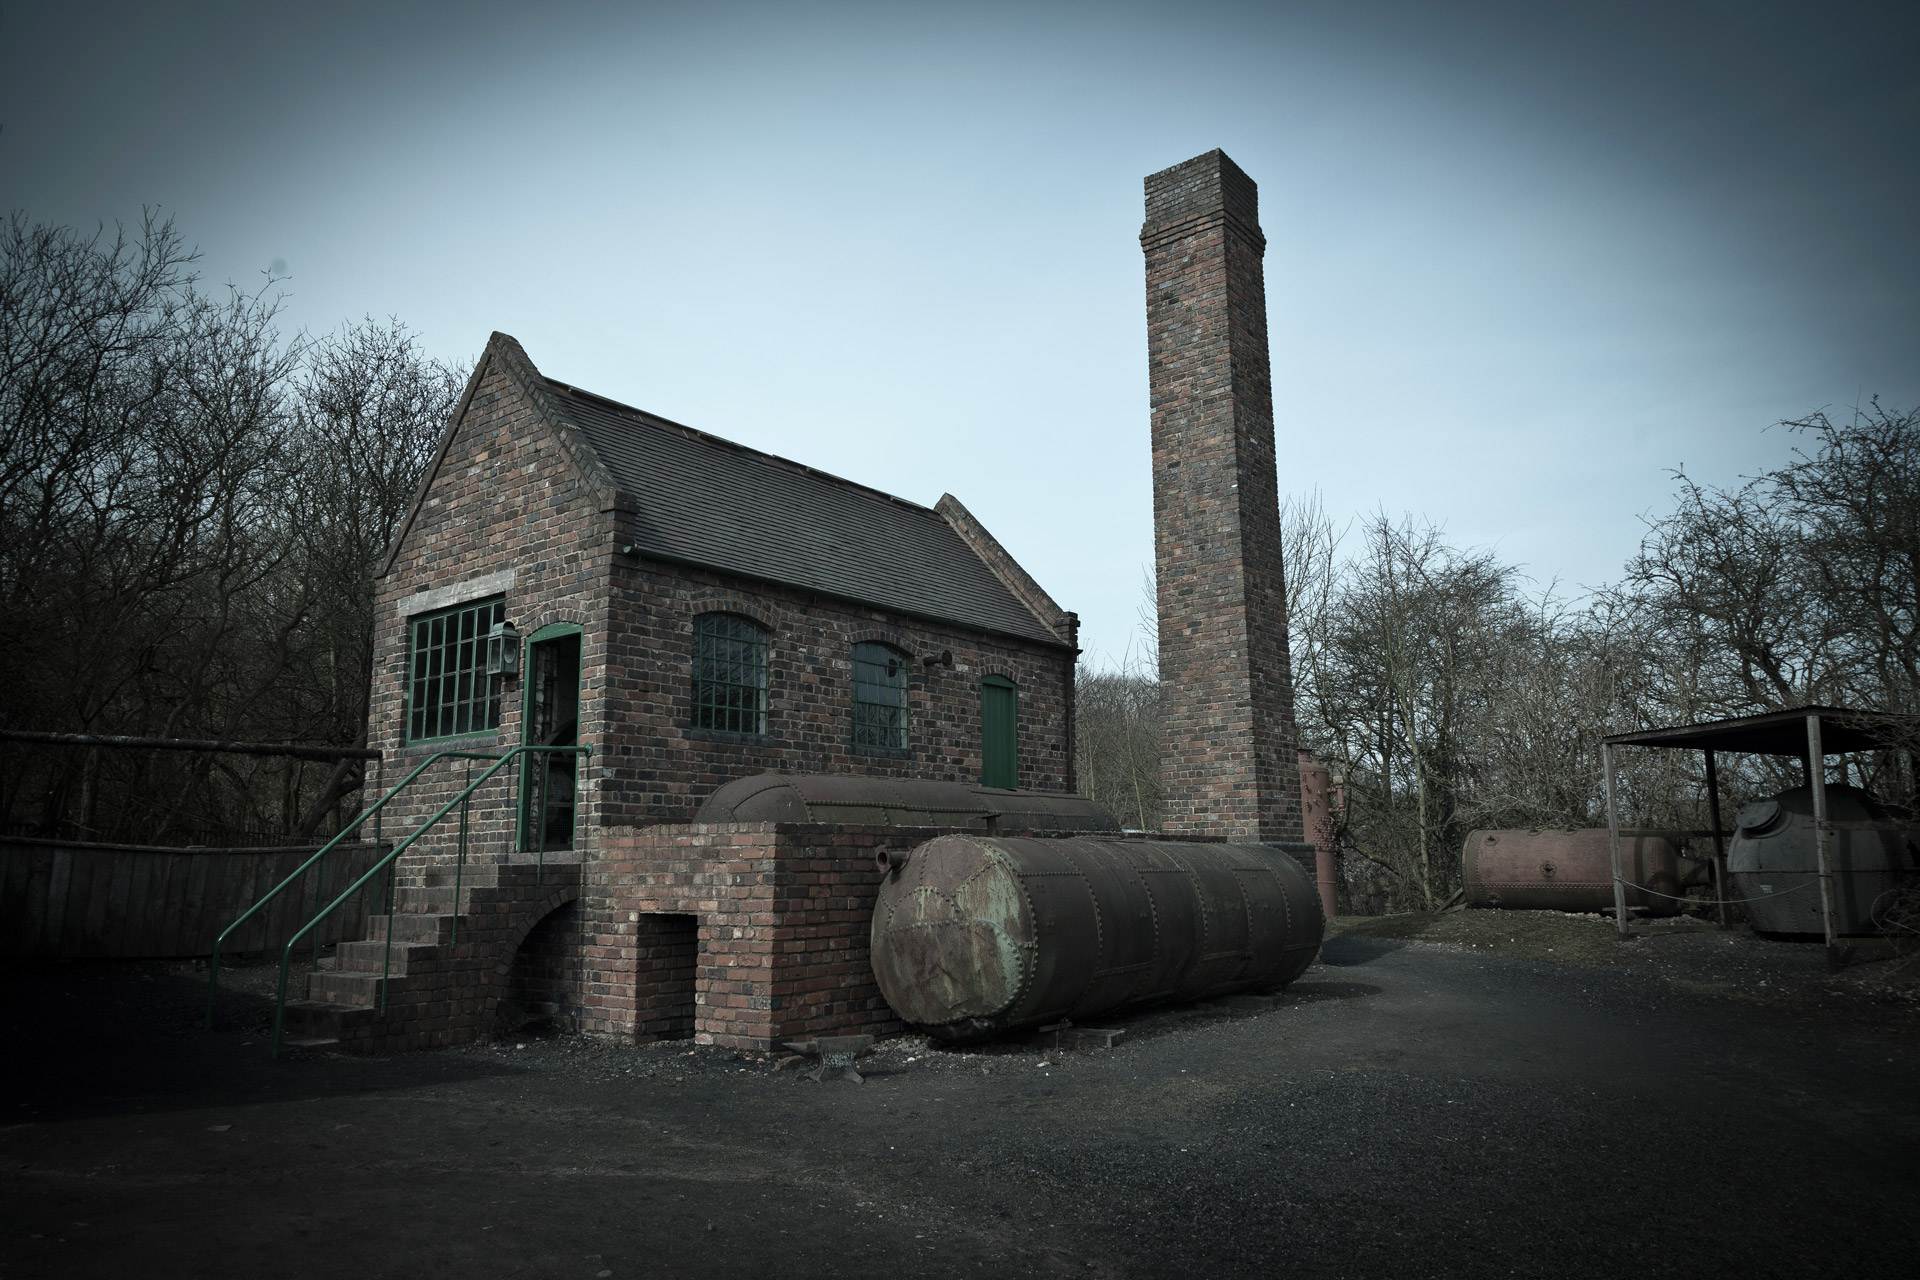 Steam engine house from the Black Country Museum